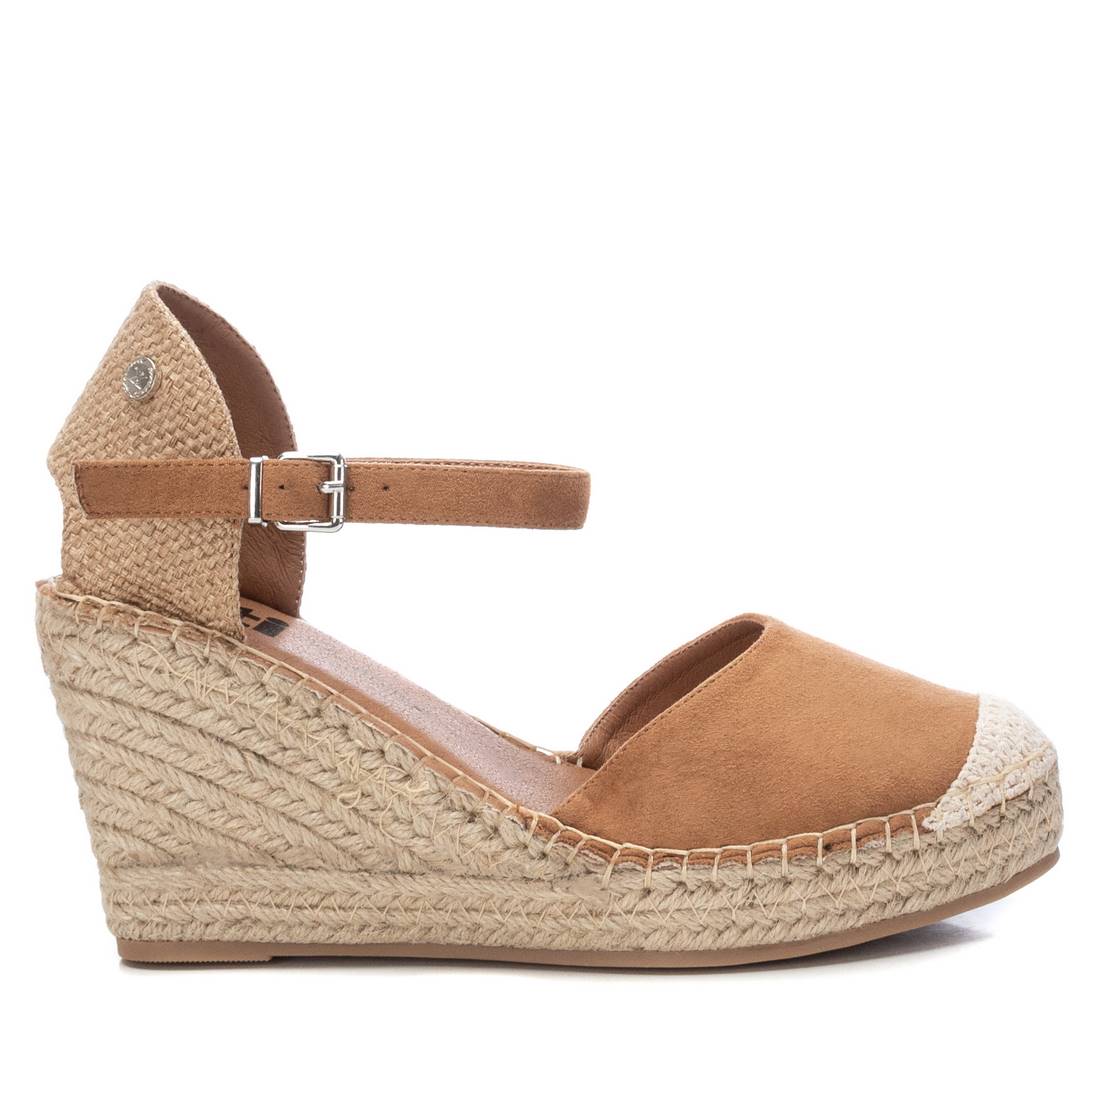     Front view of XTI Camel Faux Suede Espadrille Wedge Sandals, perfect for summer.